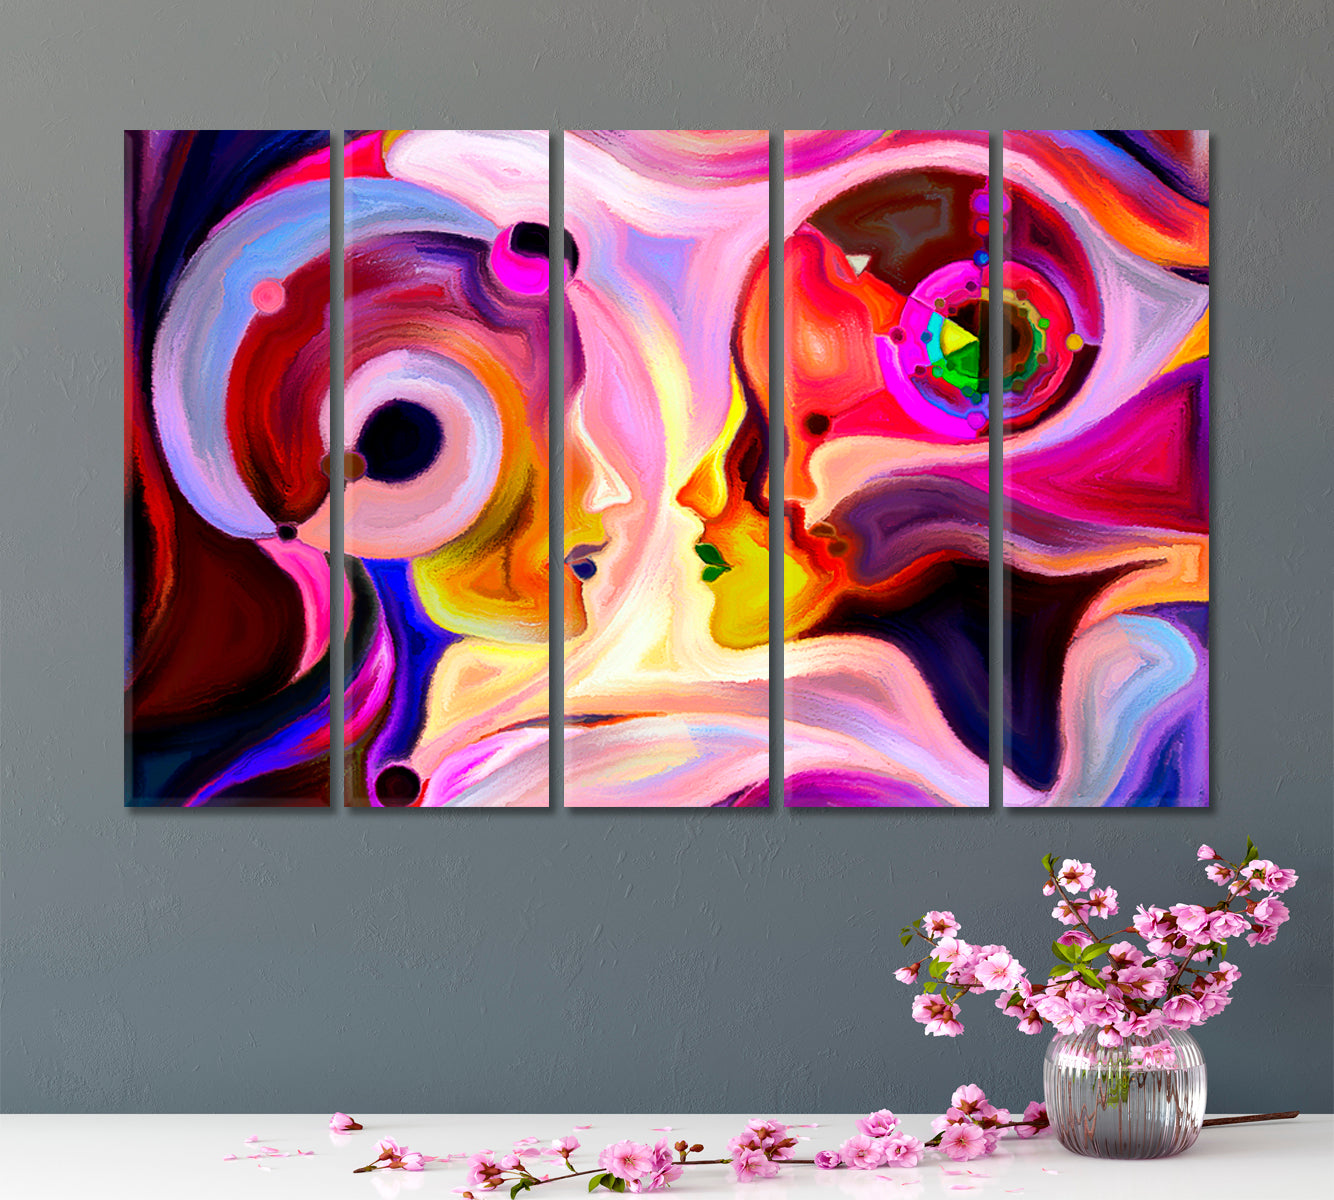 Modern Abstract Design Woman Man and Child Consciousness Art Artesty 5 panels 36" x 24" 